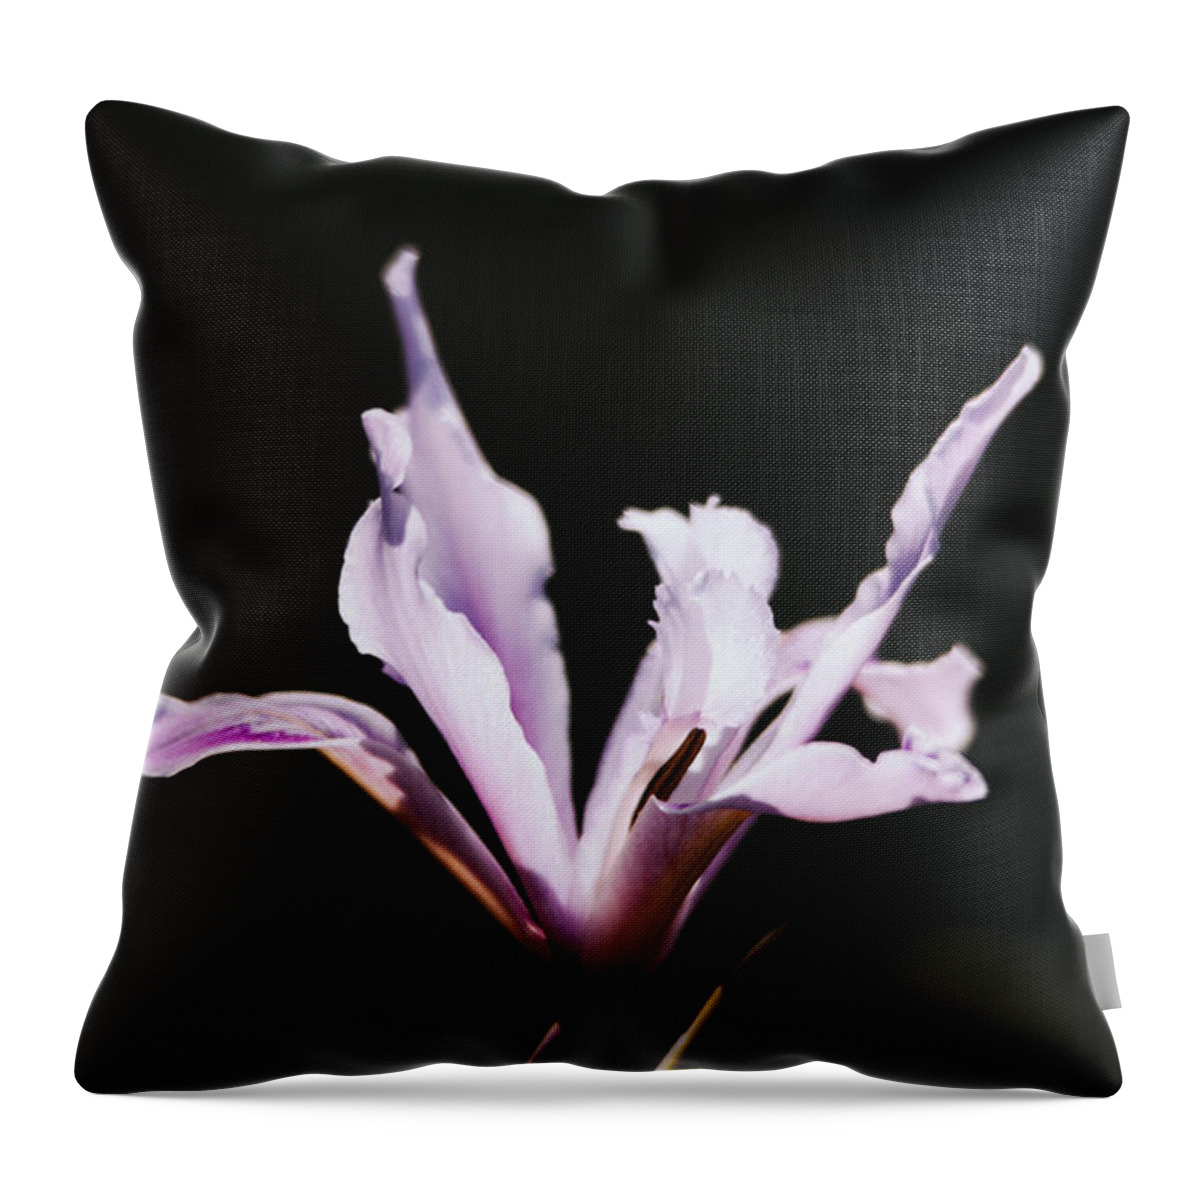 Spring Throw Pillow featuring the photograph Lily by Hyuntae Kim